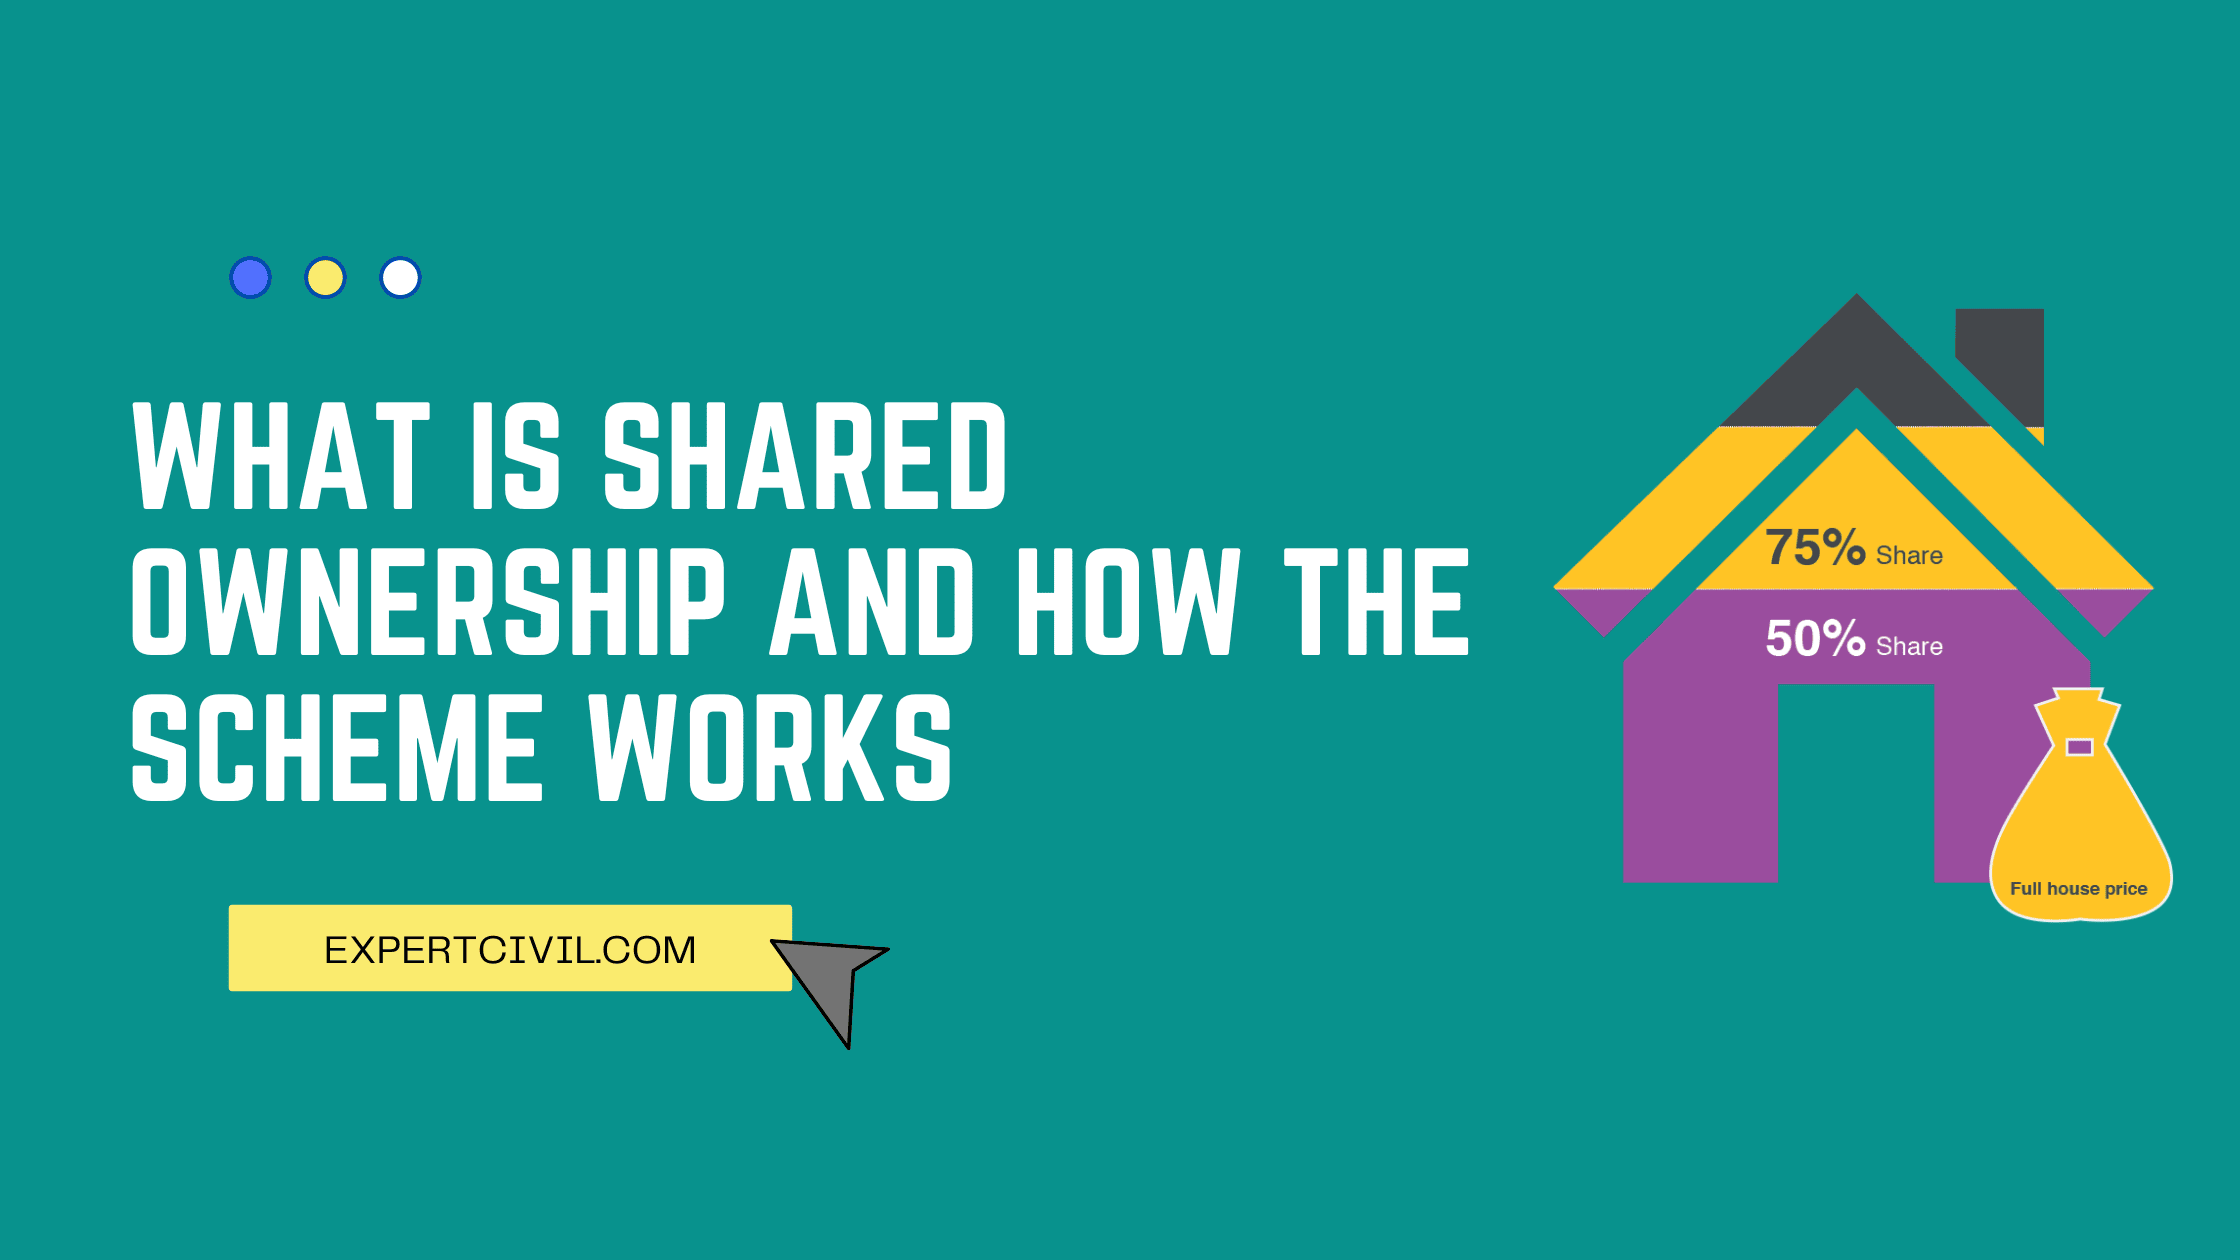 What is shared ownership and how the scheme works